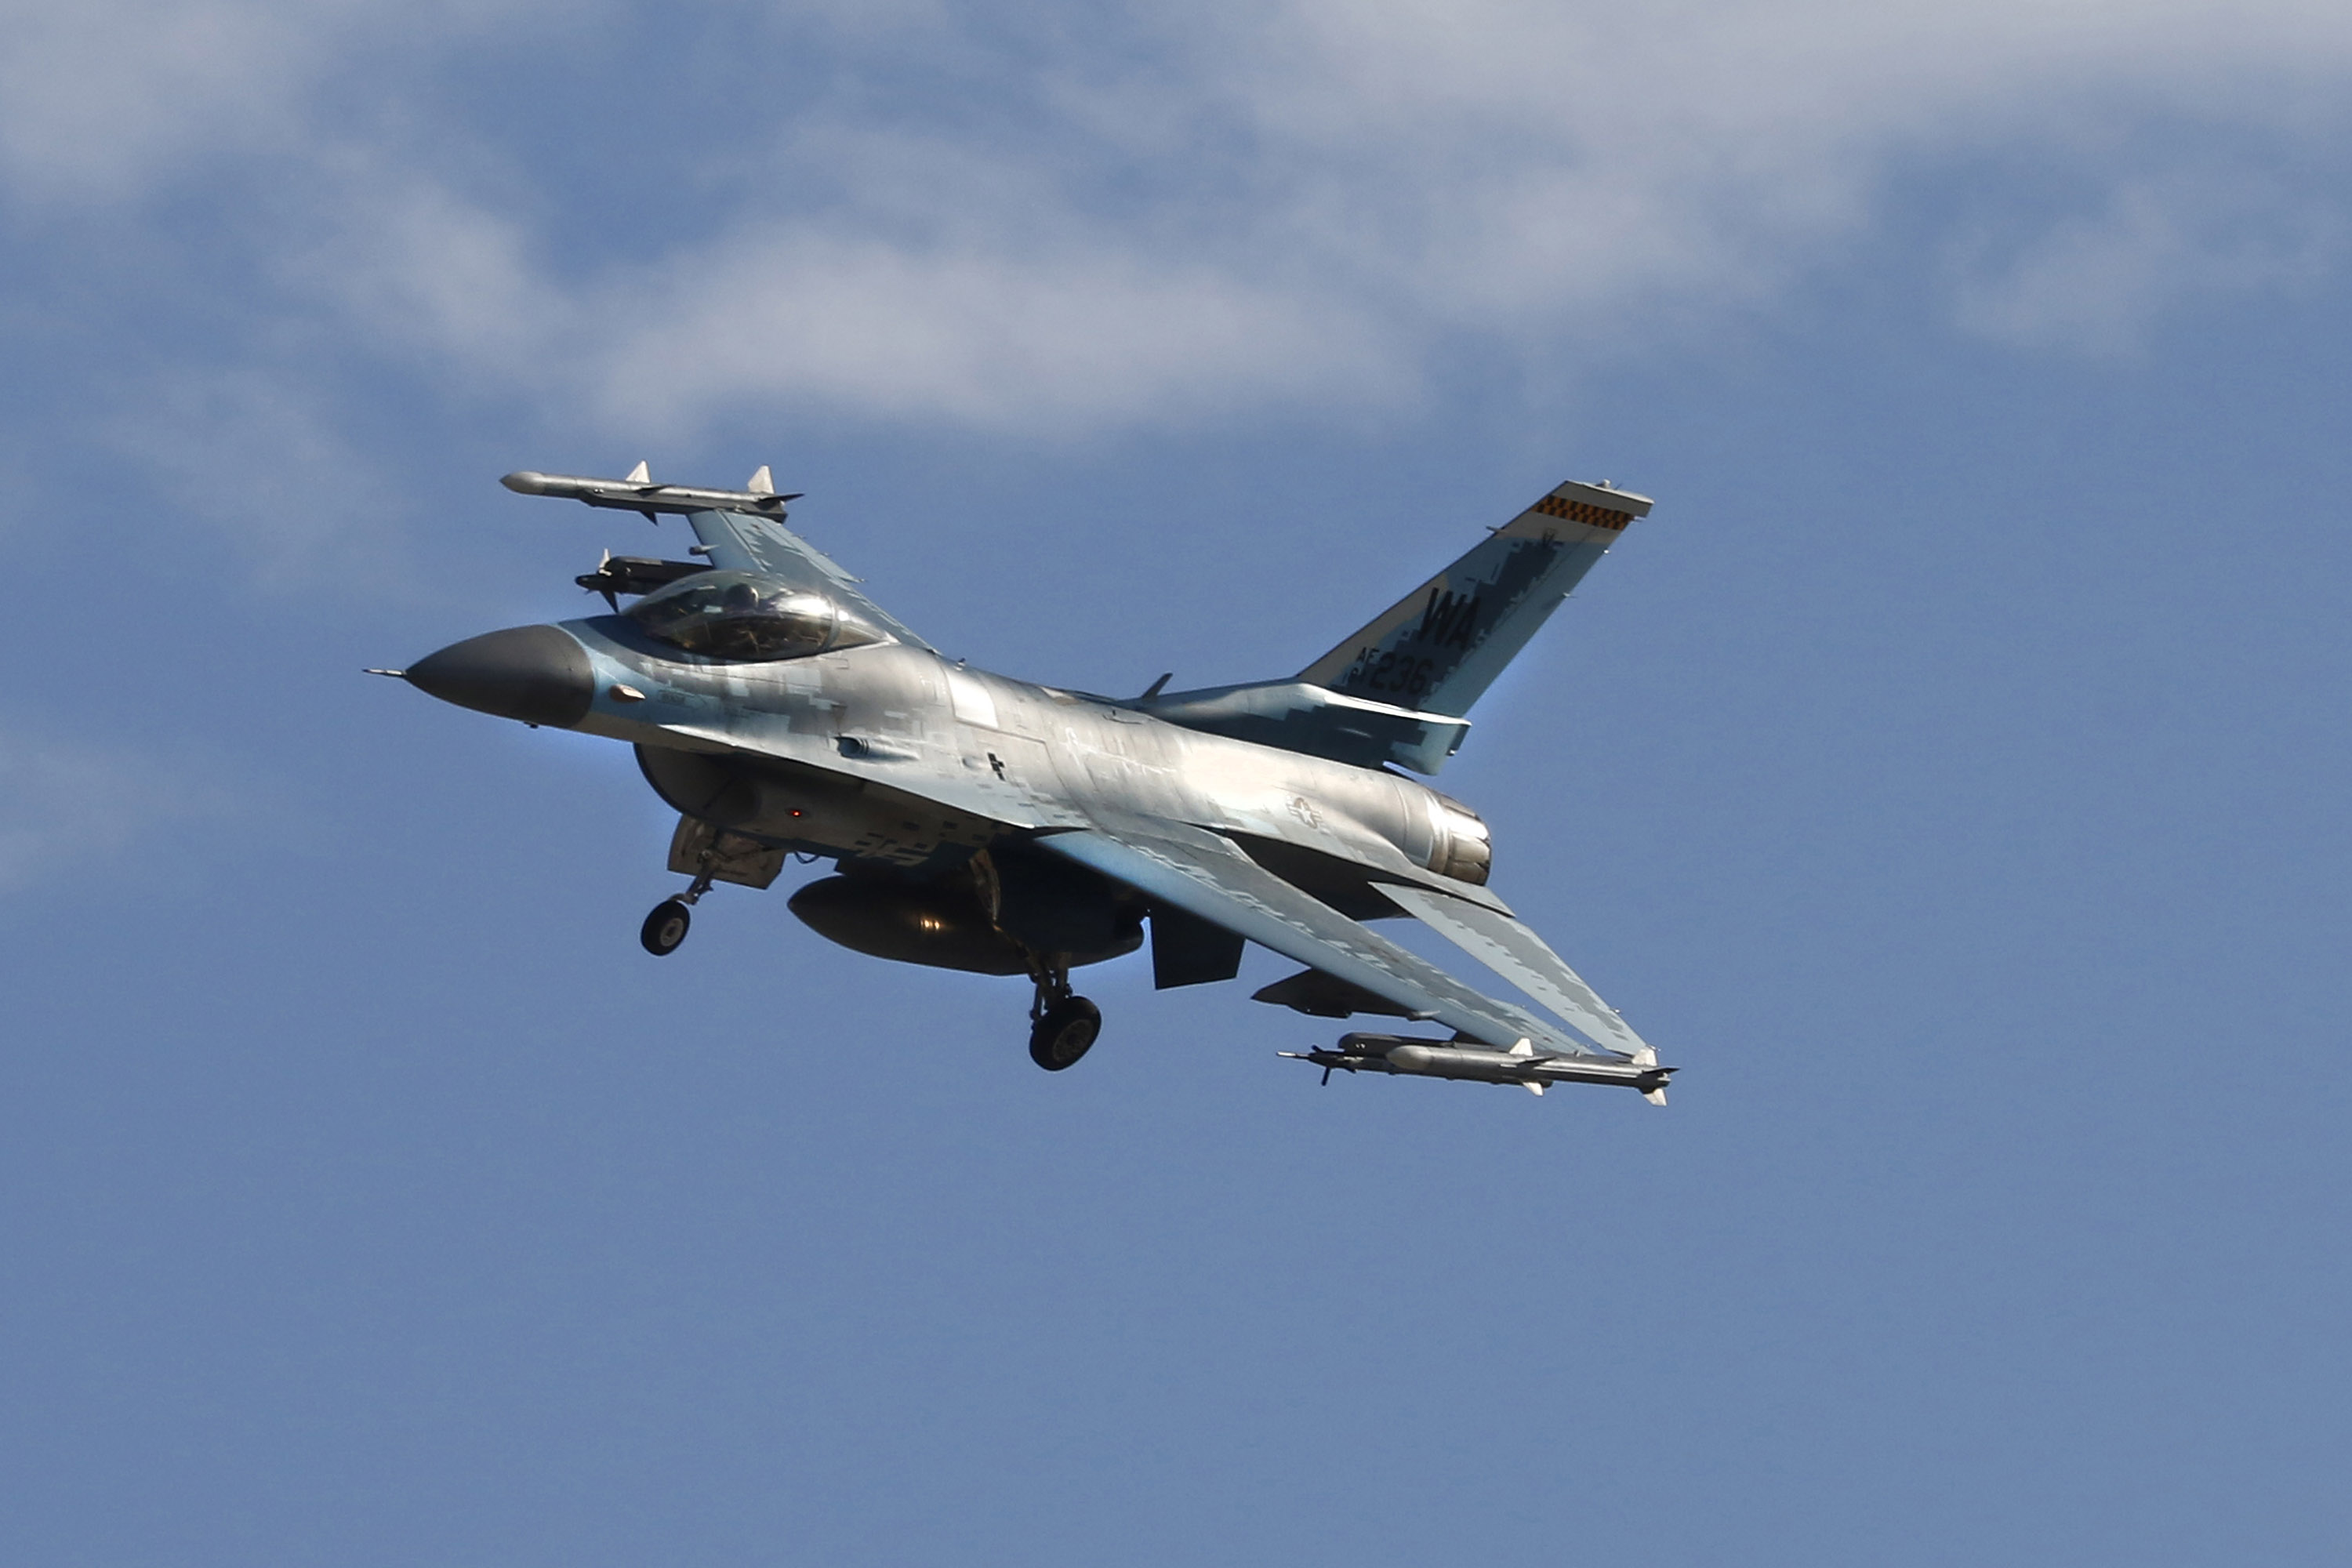 File photo of a F-16C Fighting Falcon fighter jet.